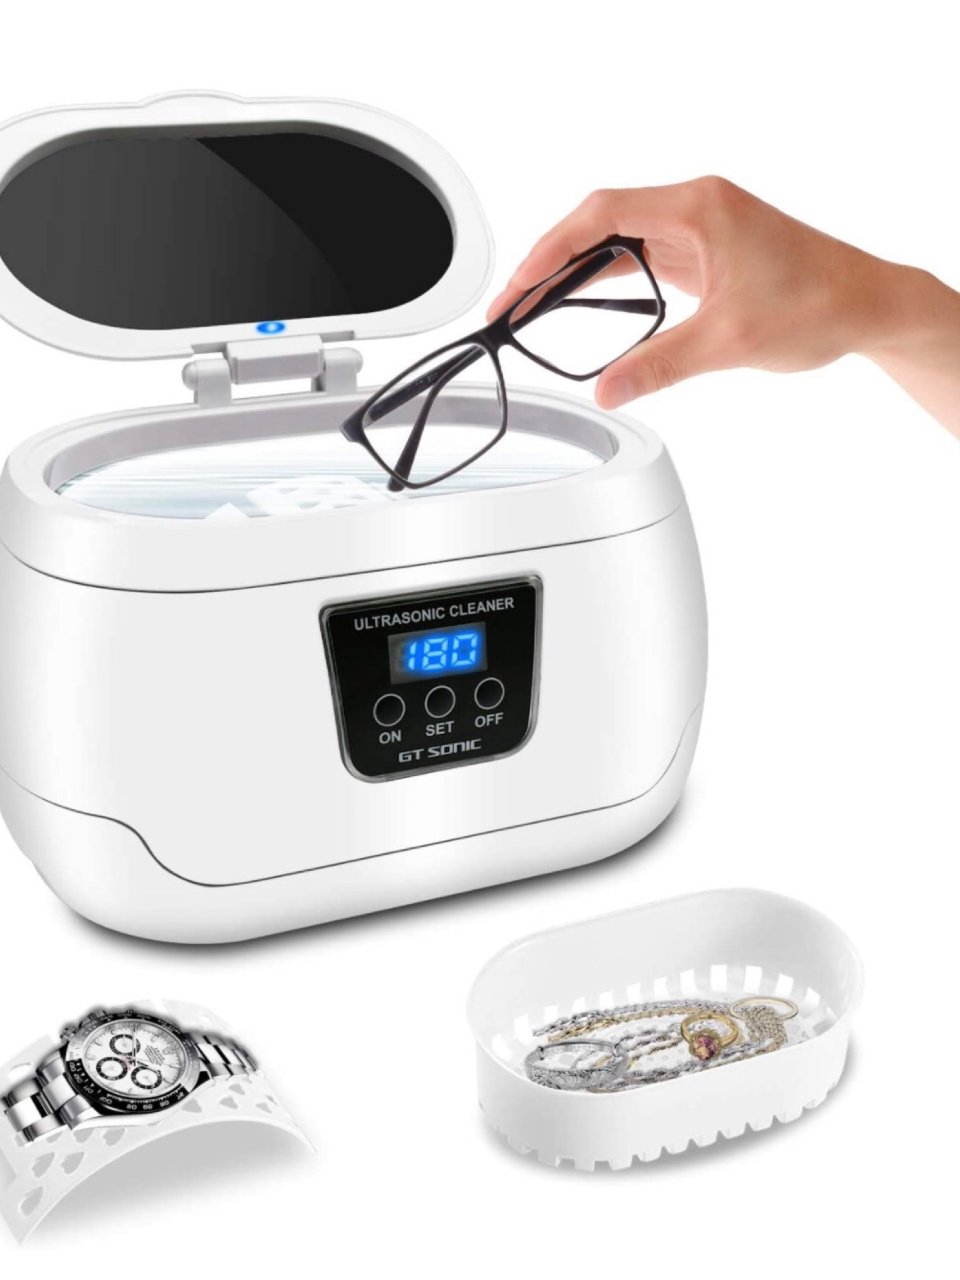 Ultrasonic Cleaner, Professional Ultrasonic Jewelry Cleaner 20 Ounces(600ML) with Five Digital Timer, Watch Holder,Cleaning Basket, SUS Tank for Cleaning Eyeglasses, Ring,Watches, Dentures : Industrial & Scientific